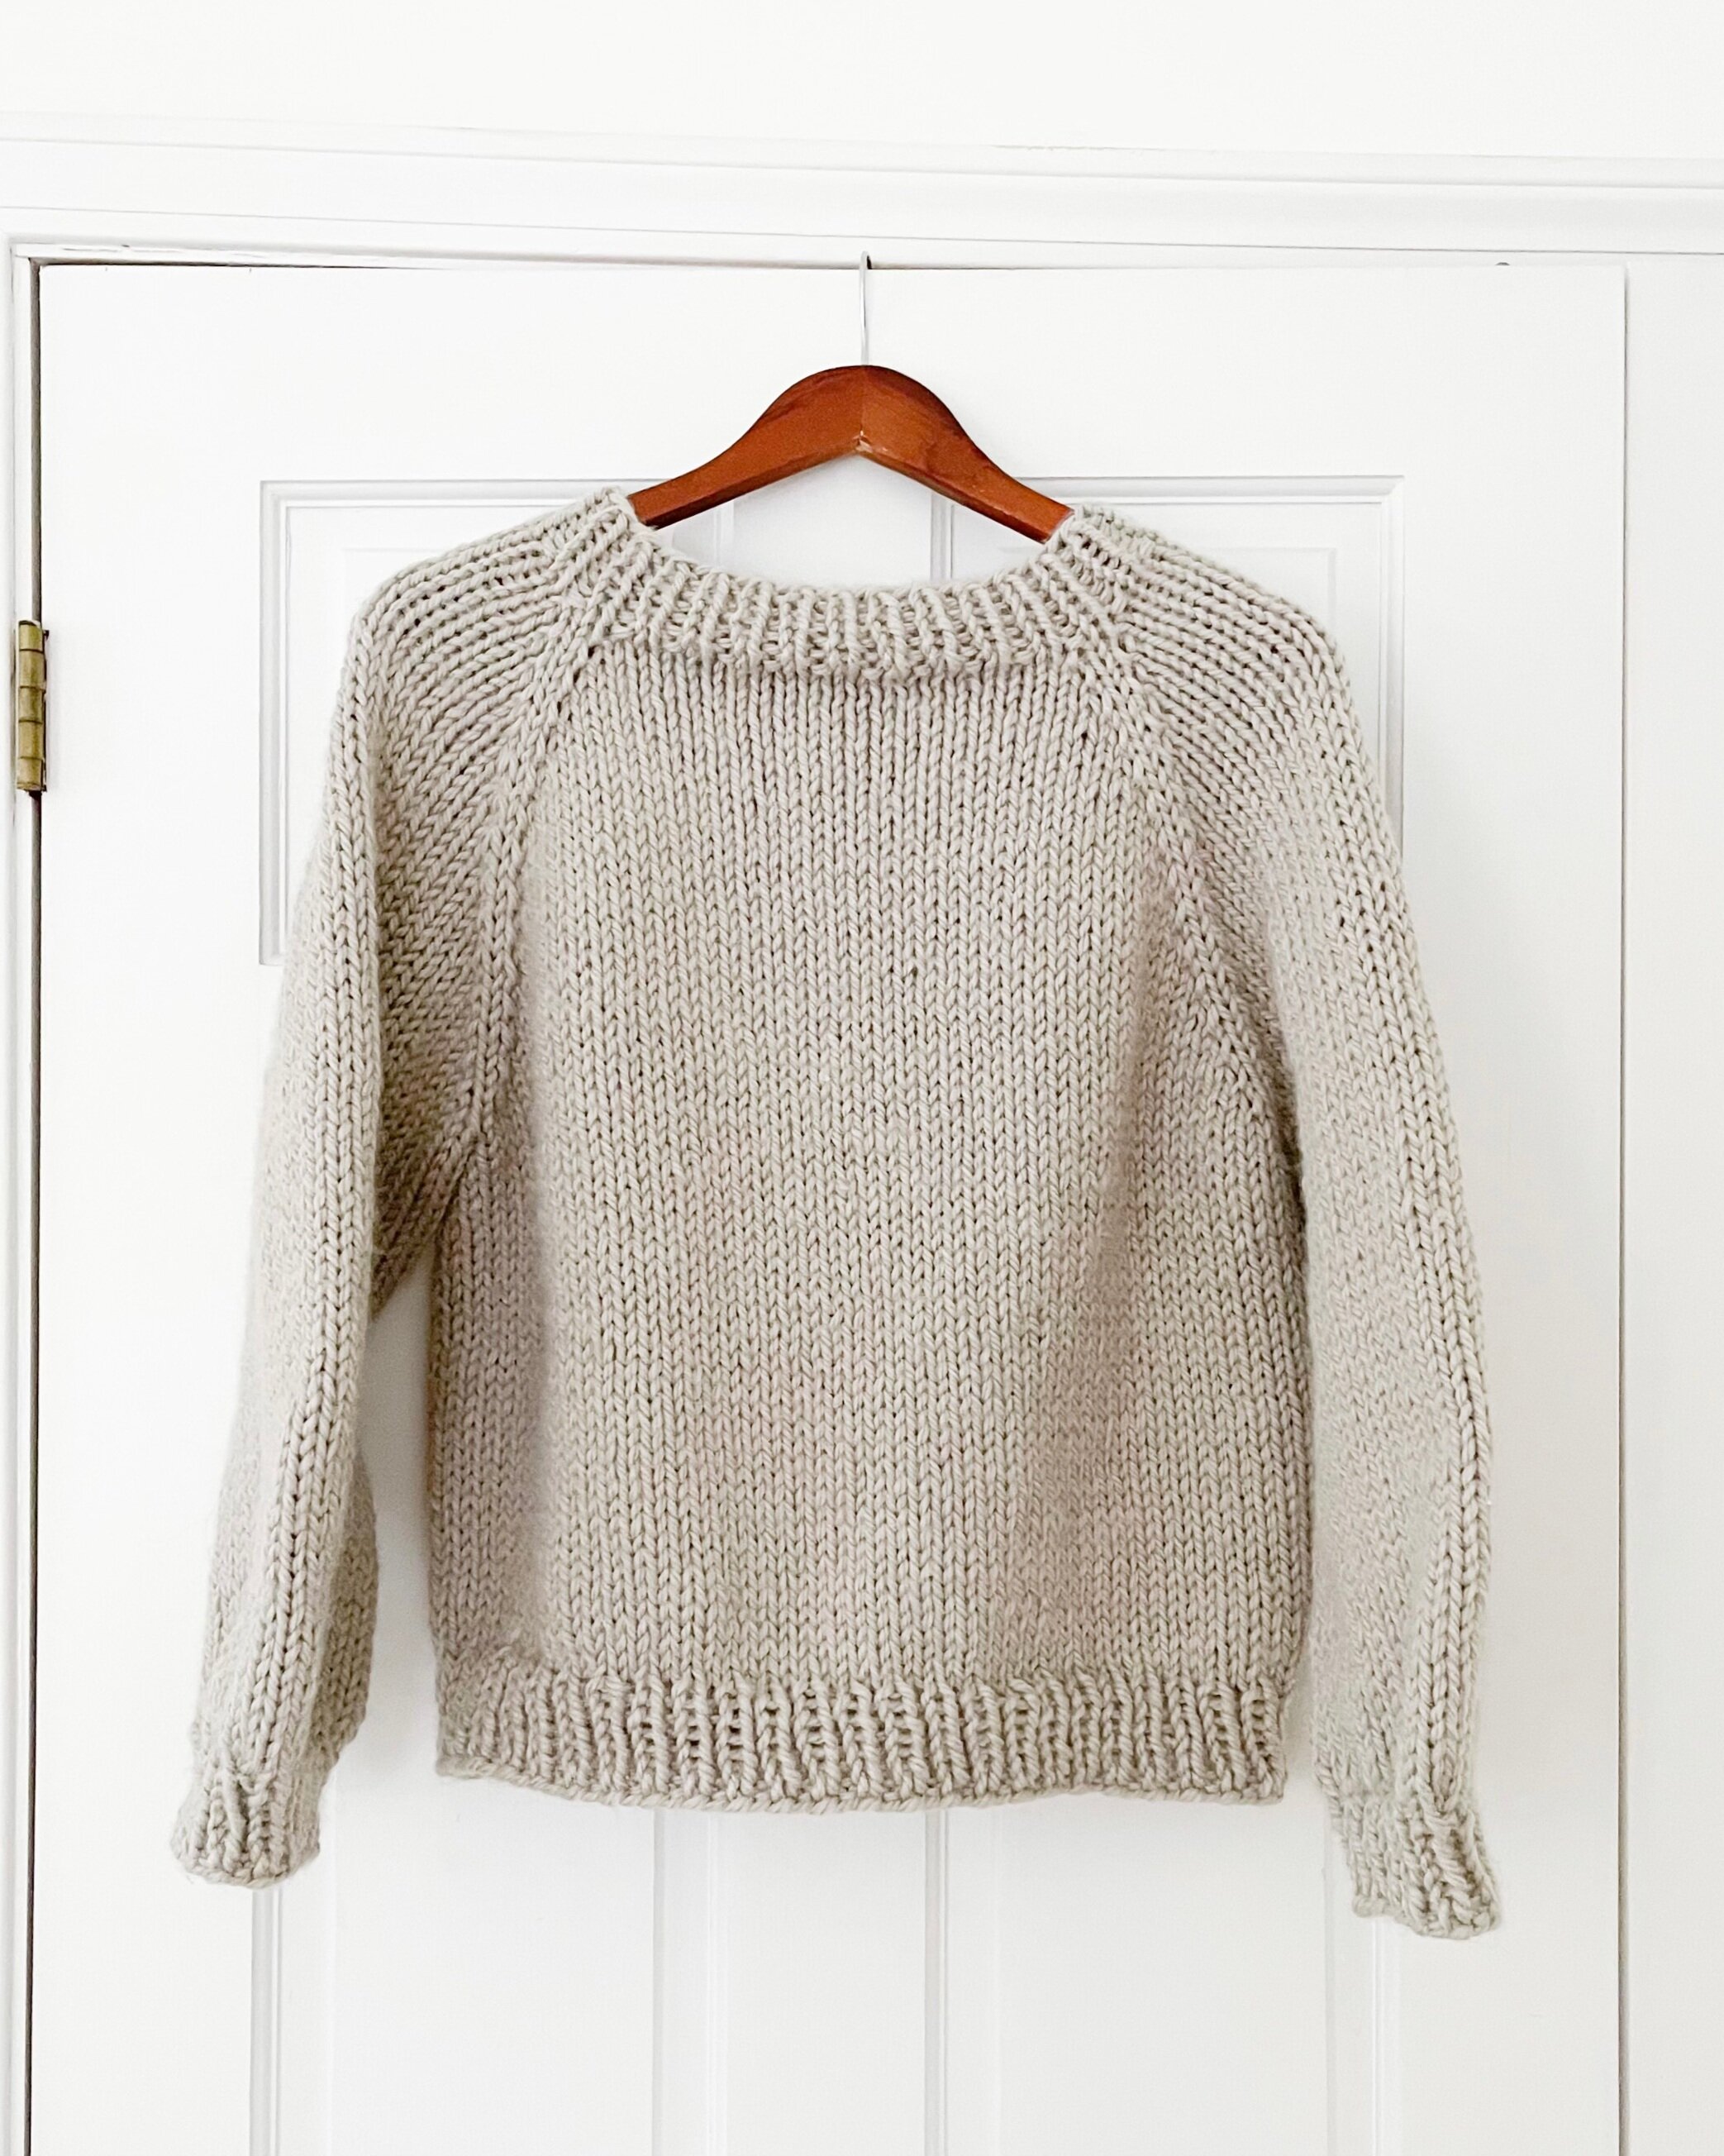 How to Knit a Simple Raglan Sweater